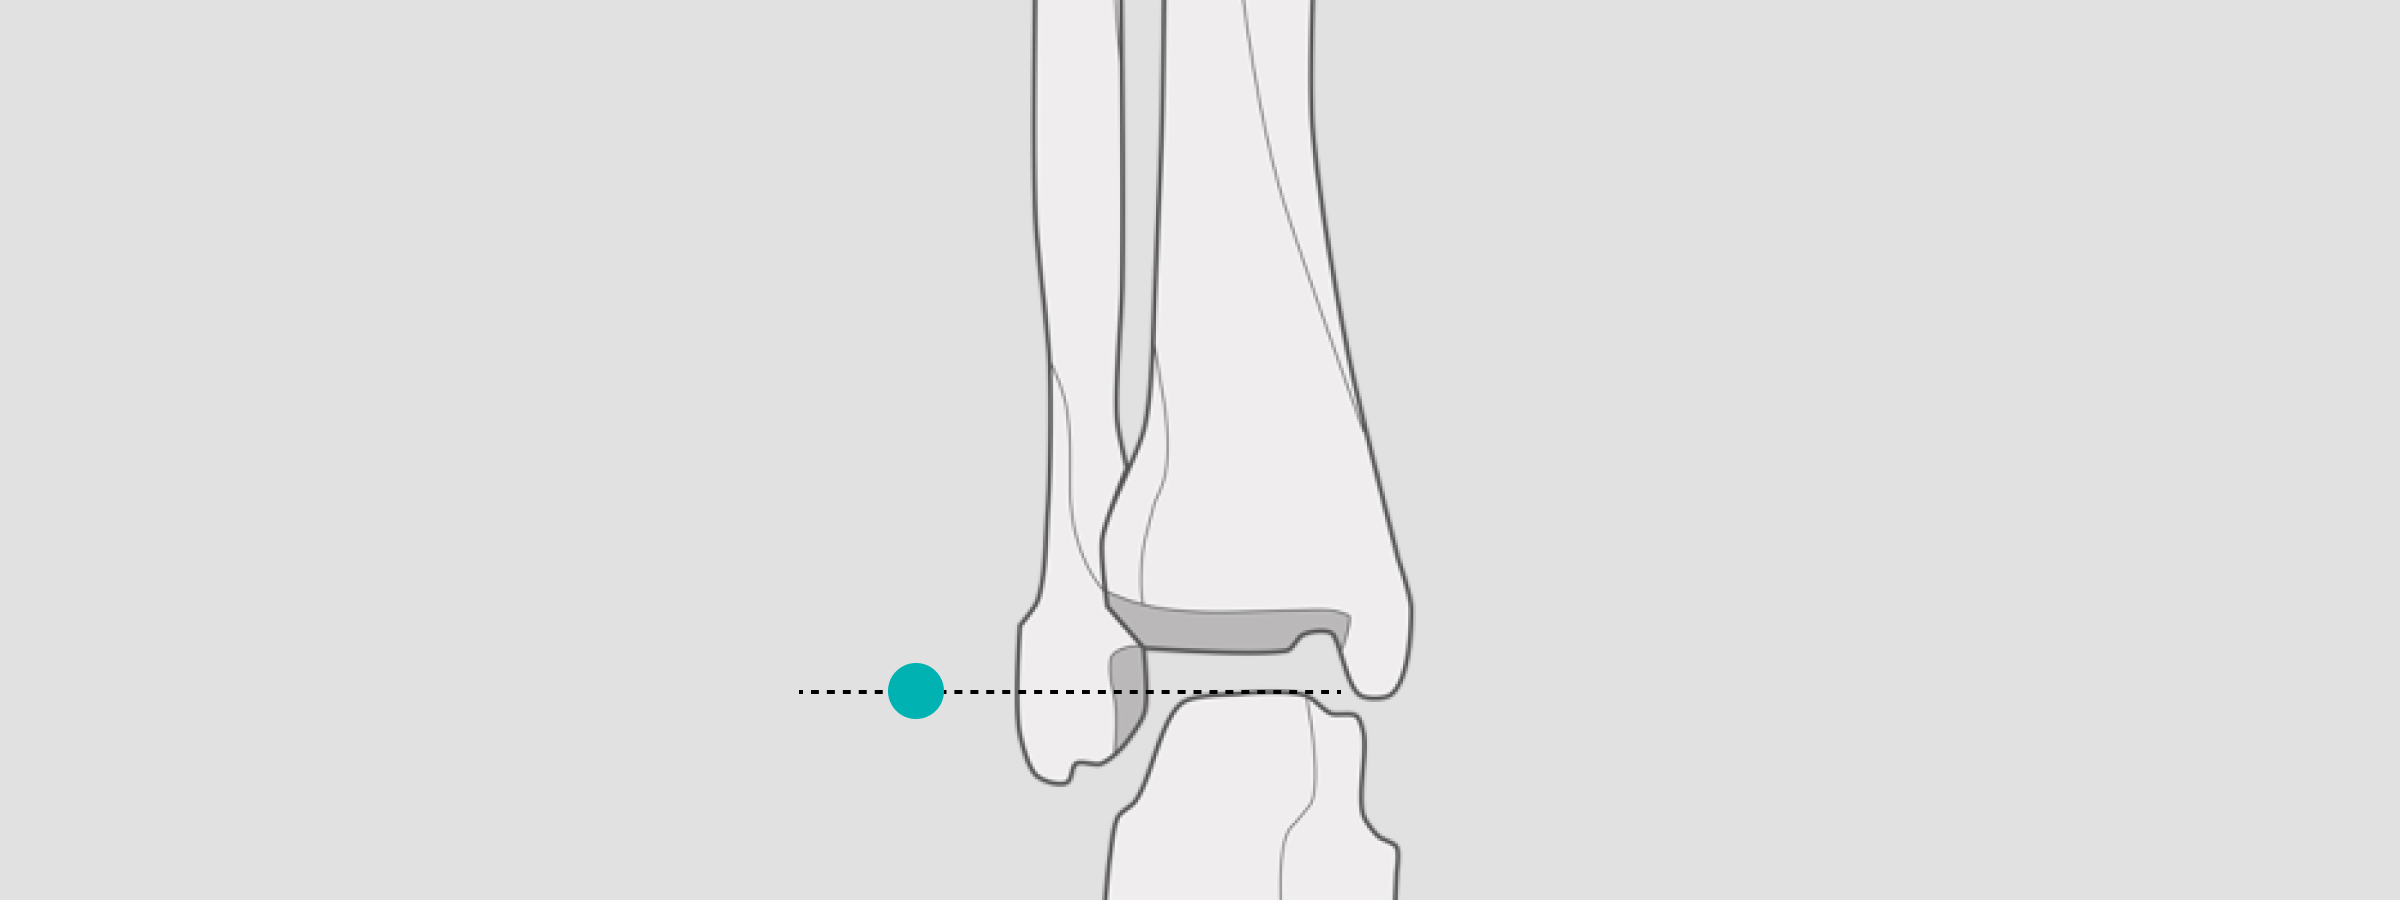 X-ray Calibration ankle